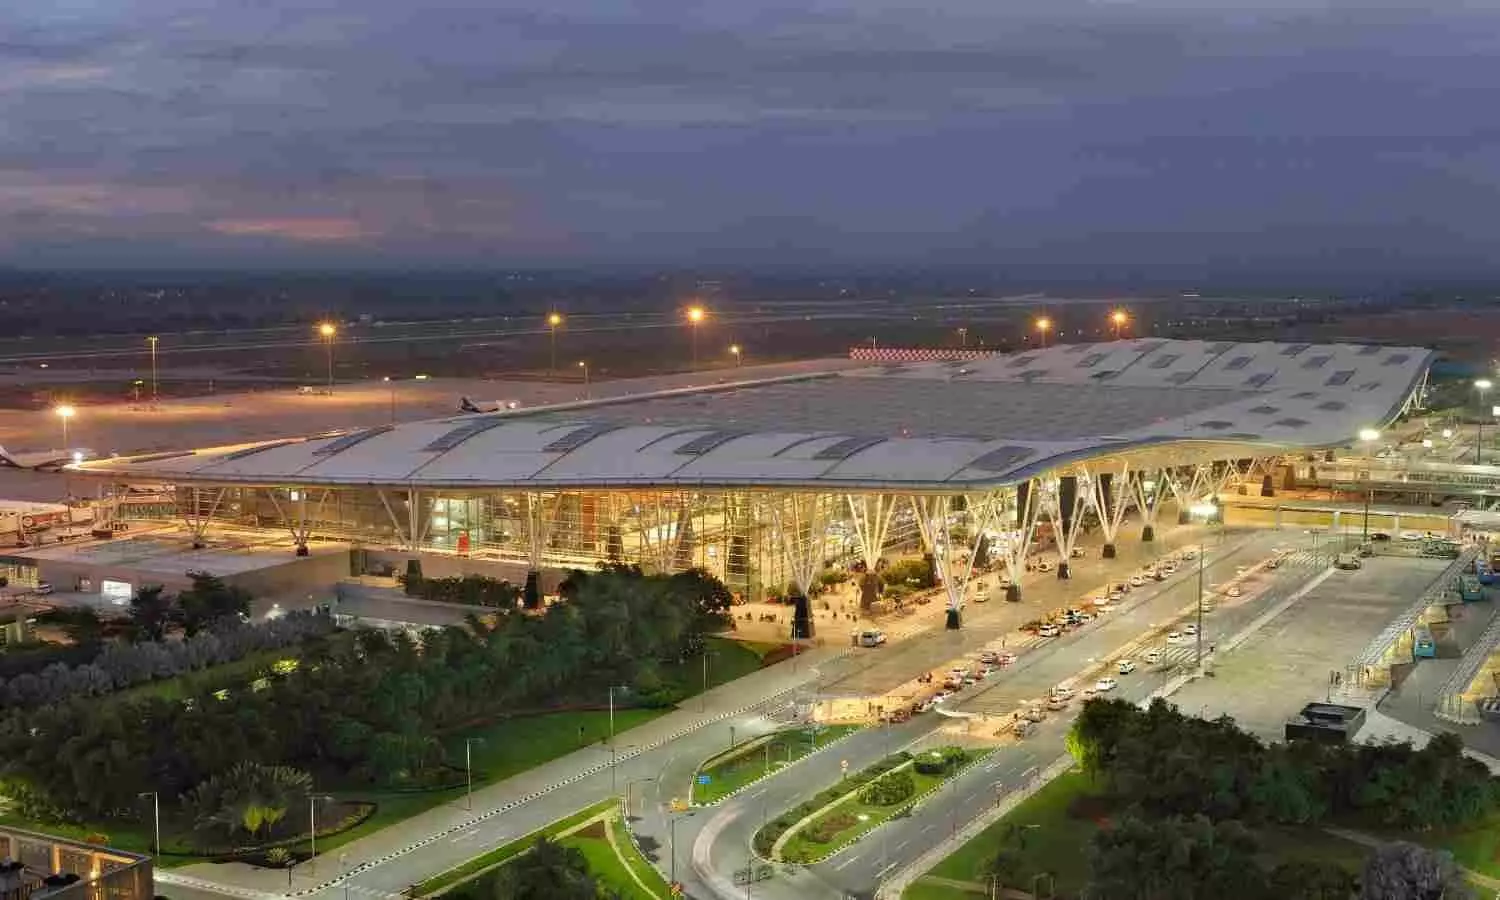 BLR Airport rounds up CY 2022 with impressive growth in cargo volumes